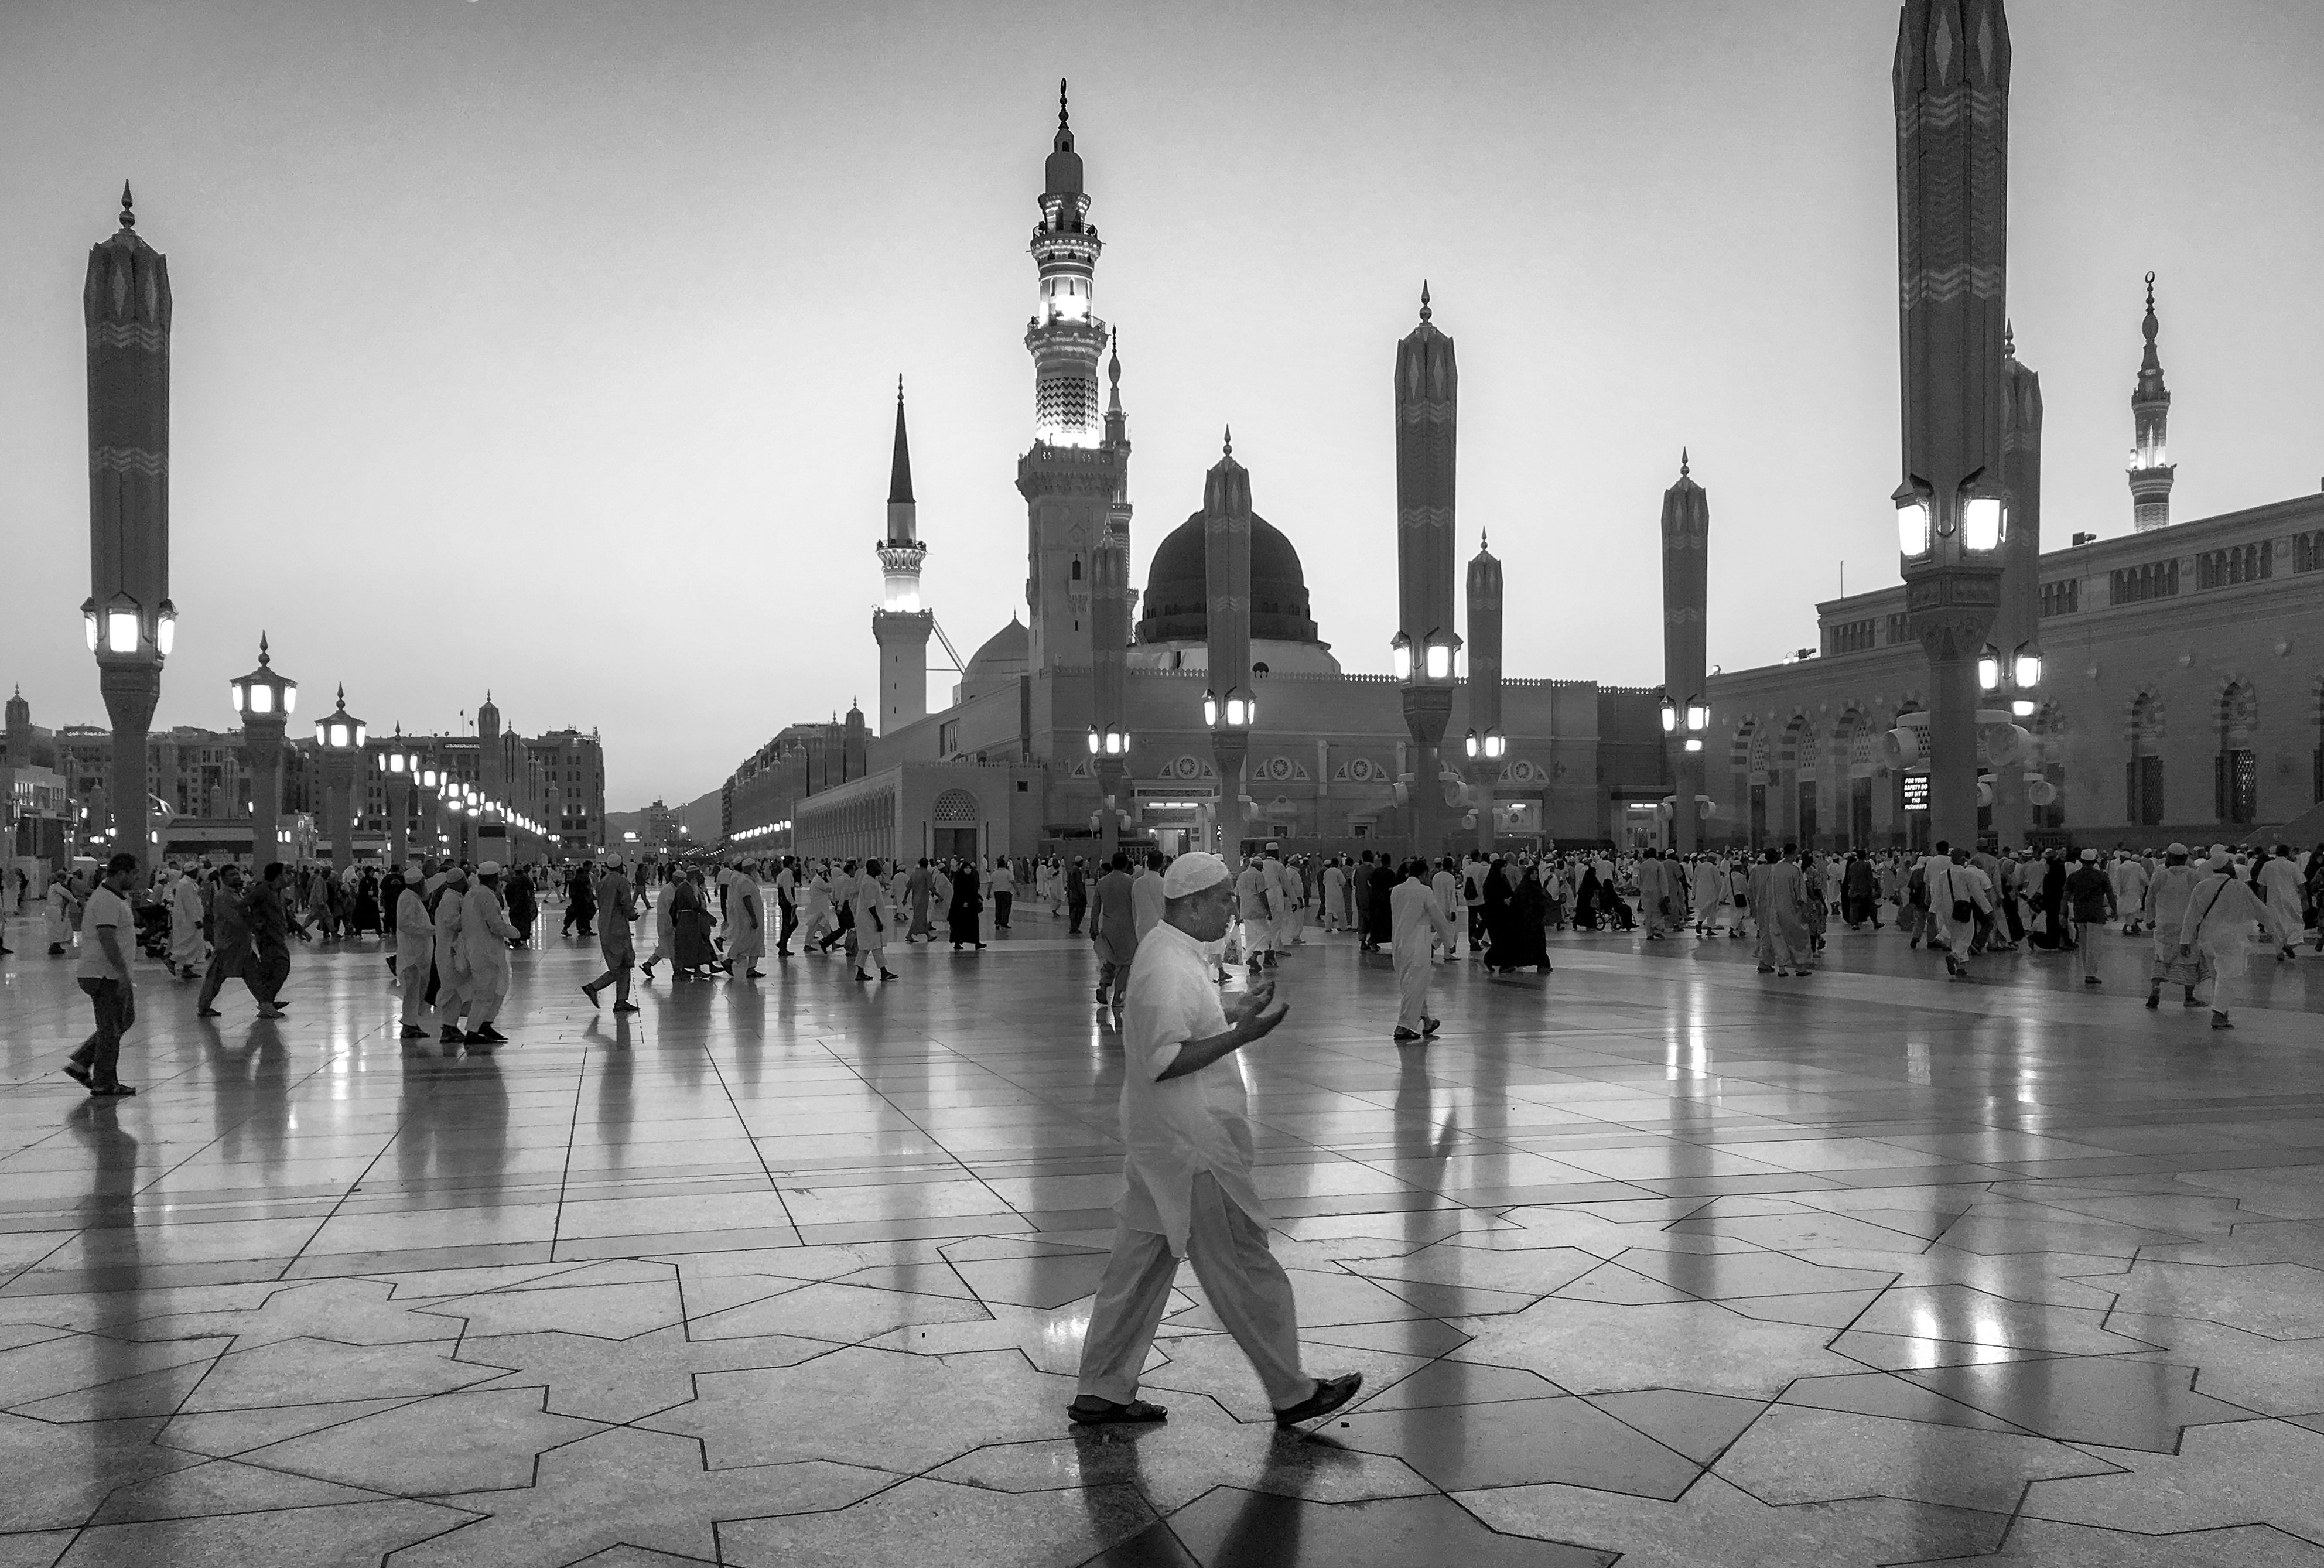 Hope This was a scene in the courtyard of Masjid An-nabawi in Medina. A call of Maghrib prayer was made and I spotted a man walking and responding the the call of prayer by making supplications.